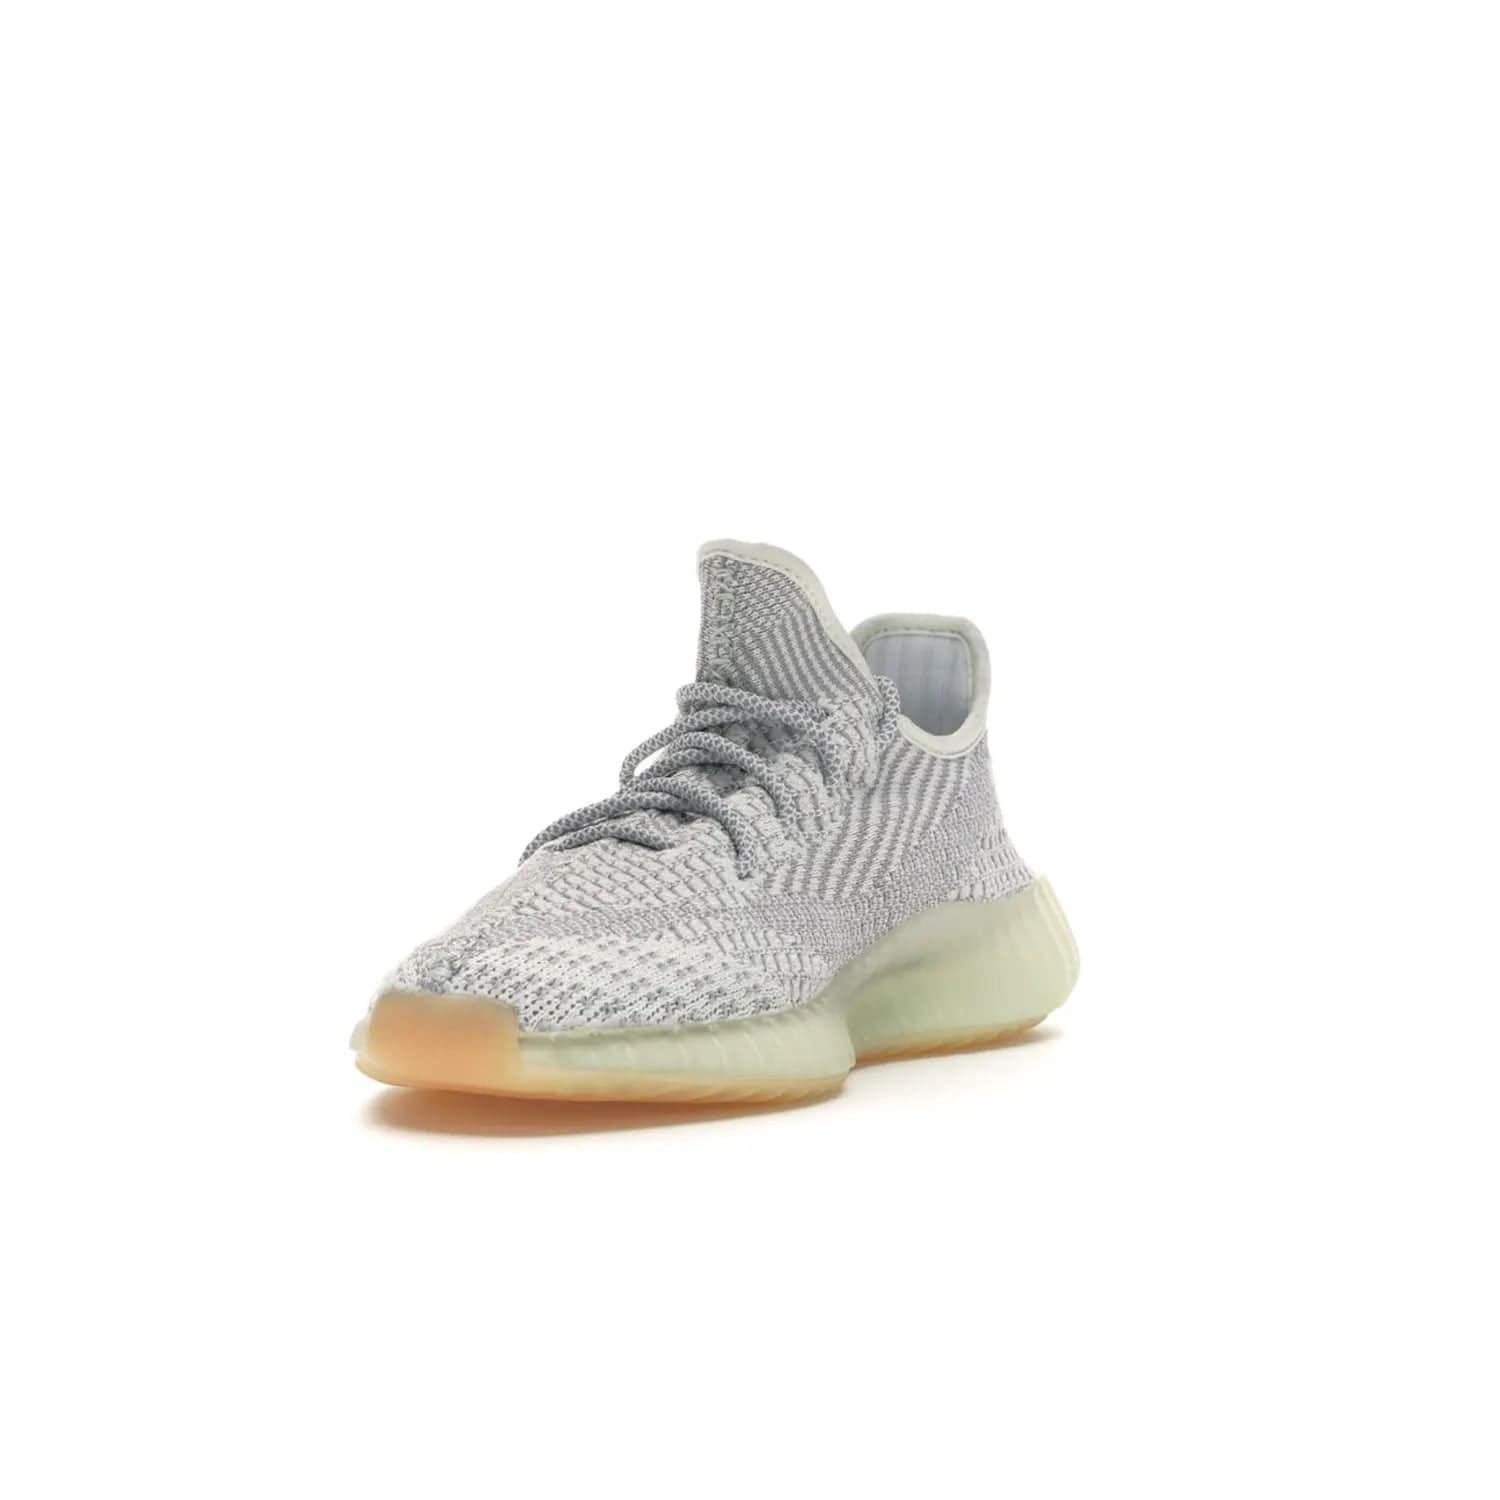 adidas Yeezy Boost 350 V2 Yeshaya (Non-Reflective) - Image 13 - Only at www.BallersClubKickz.com - Step out in style with the adidas Yeezy Boost 350 V2 Yeshaya (Non-Reflective). Gray-and-white Primeknit upper with mesh side stripe & rope laces, plus a translucent Boost sole with a hint of yellow. Make a statement and feel comfortable with this stylish sneaker.